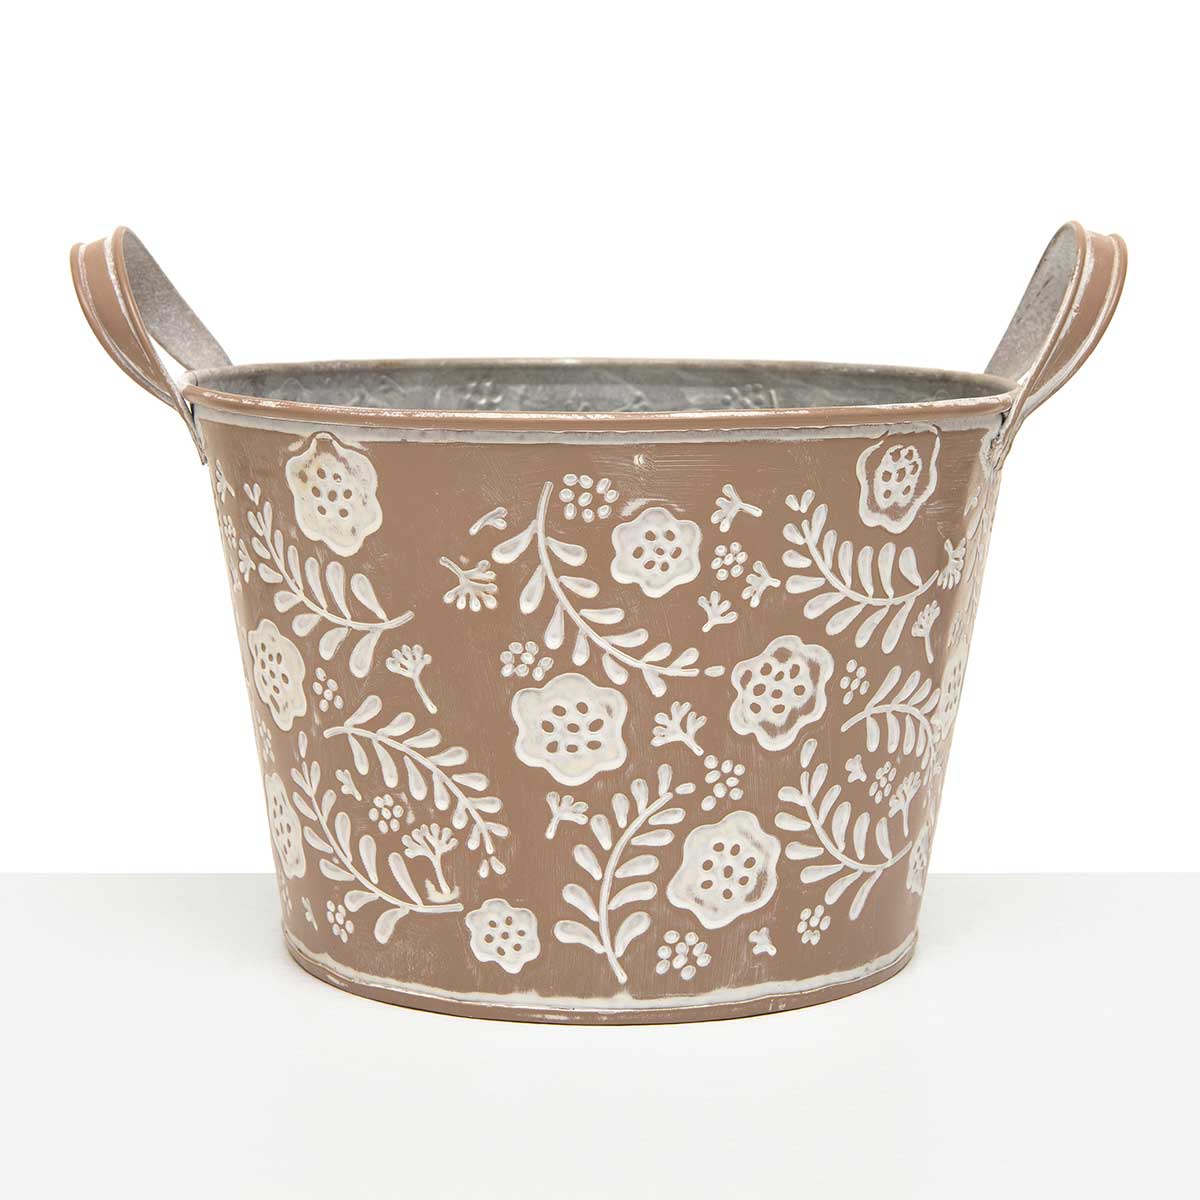 BUCKET FLOWER SHORT 7.5IN X 5IN TAUPE/WHITE METAL WITH HANDLES